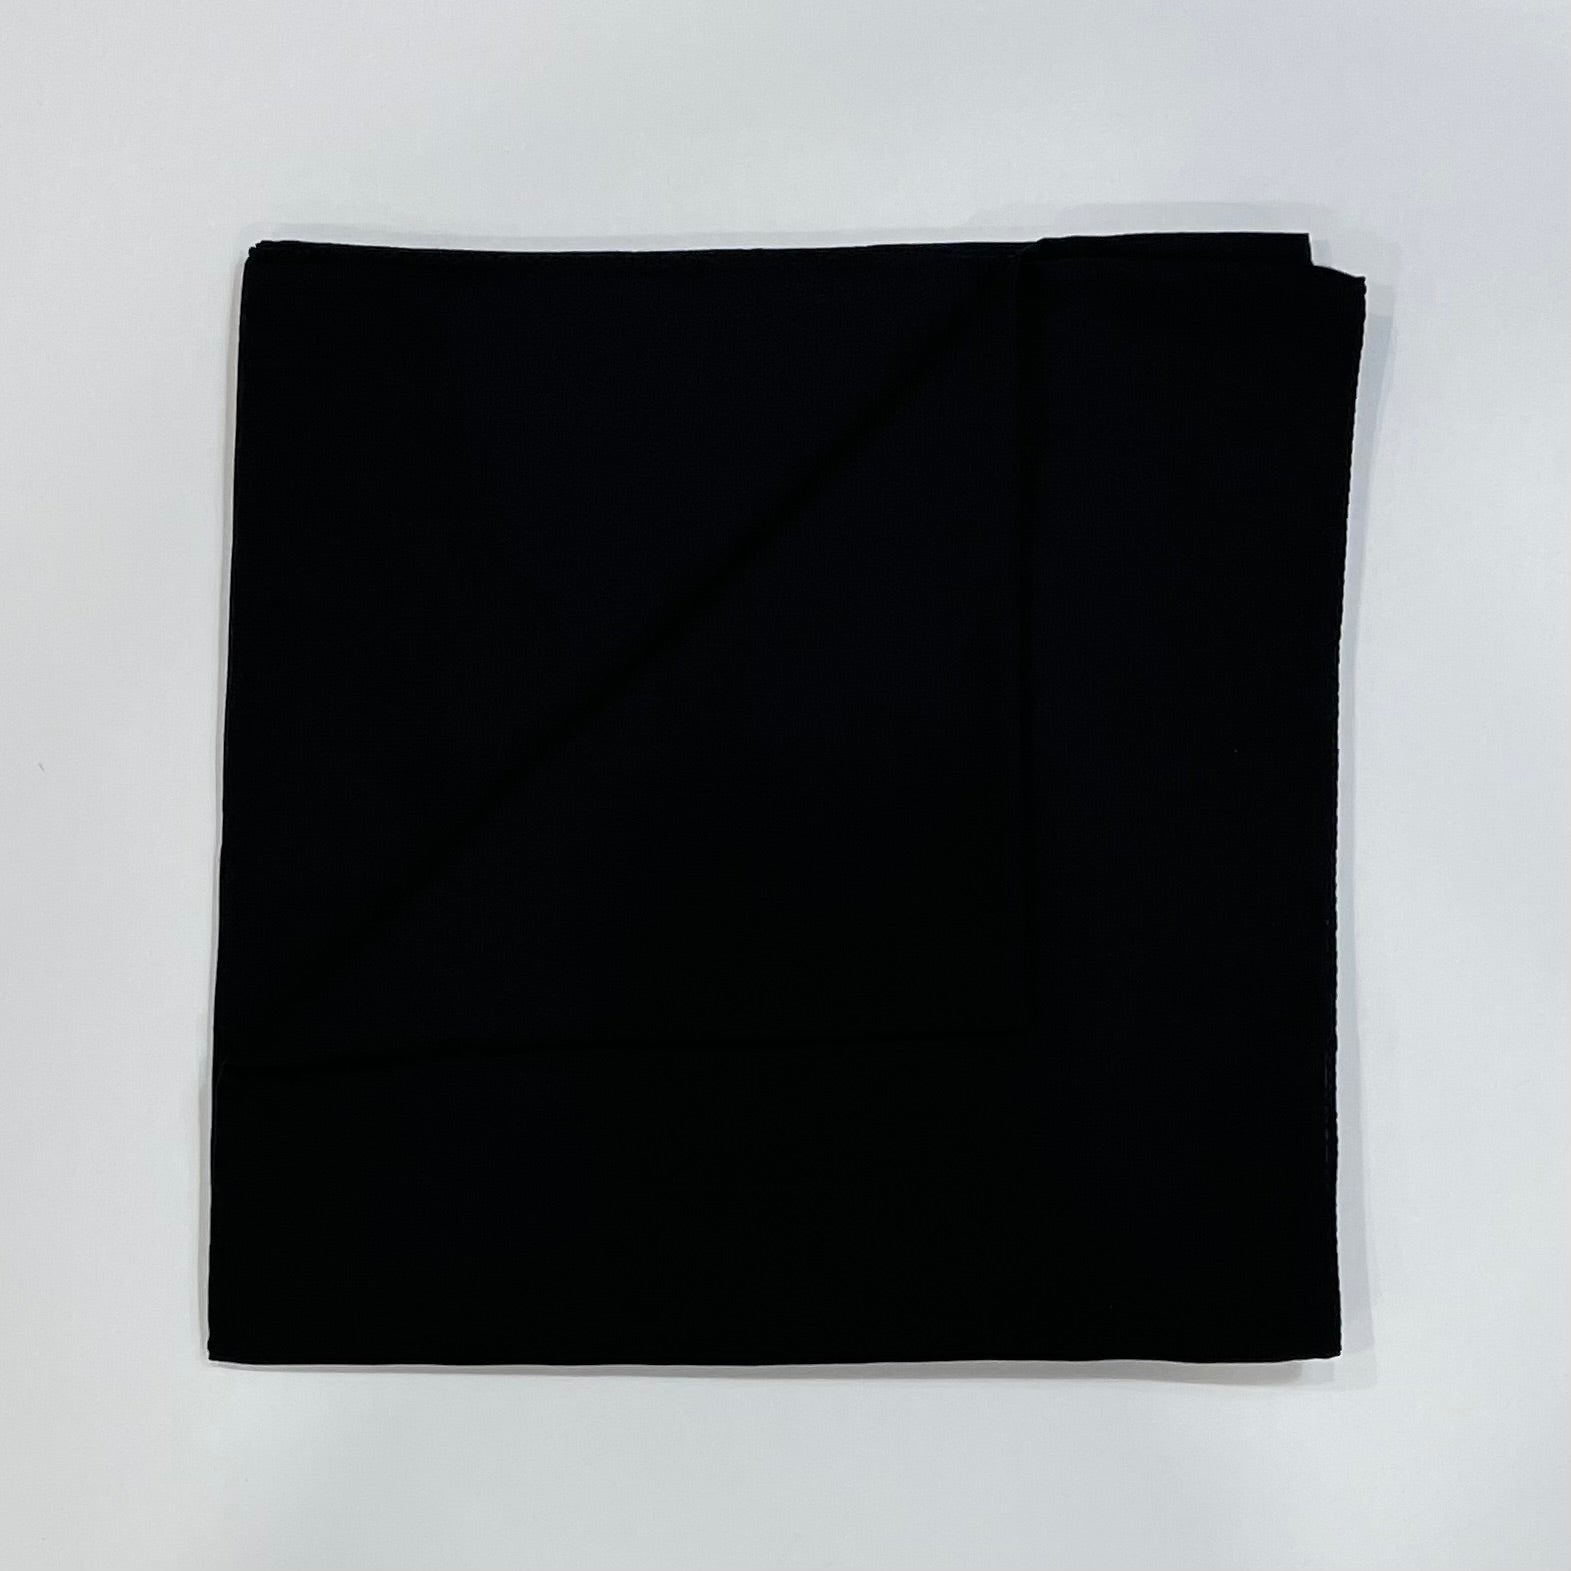 Expertly crafted from high-quality cotton, the Black Square Hijab offers a stylish and comfortable option for everyday wear. With its soft and breathable fabric, this hijab provides a comfortable fit while adding a touch of sophistication to any outfit. Perfect for any occasion.

size 120 cm x 120 cm

color may look different due to different screen resolution 